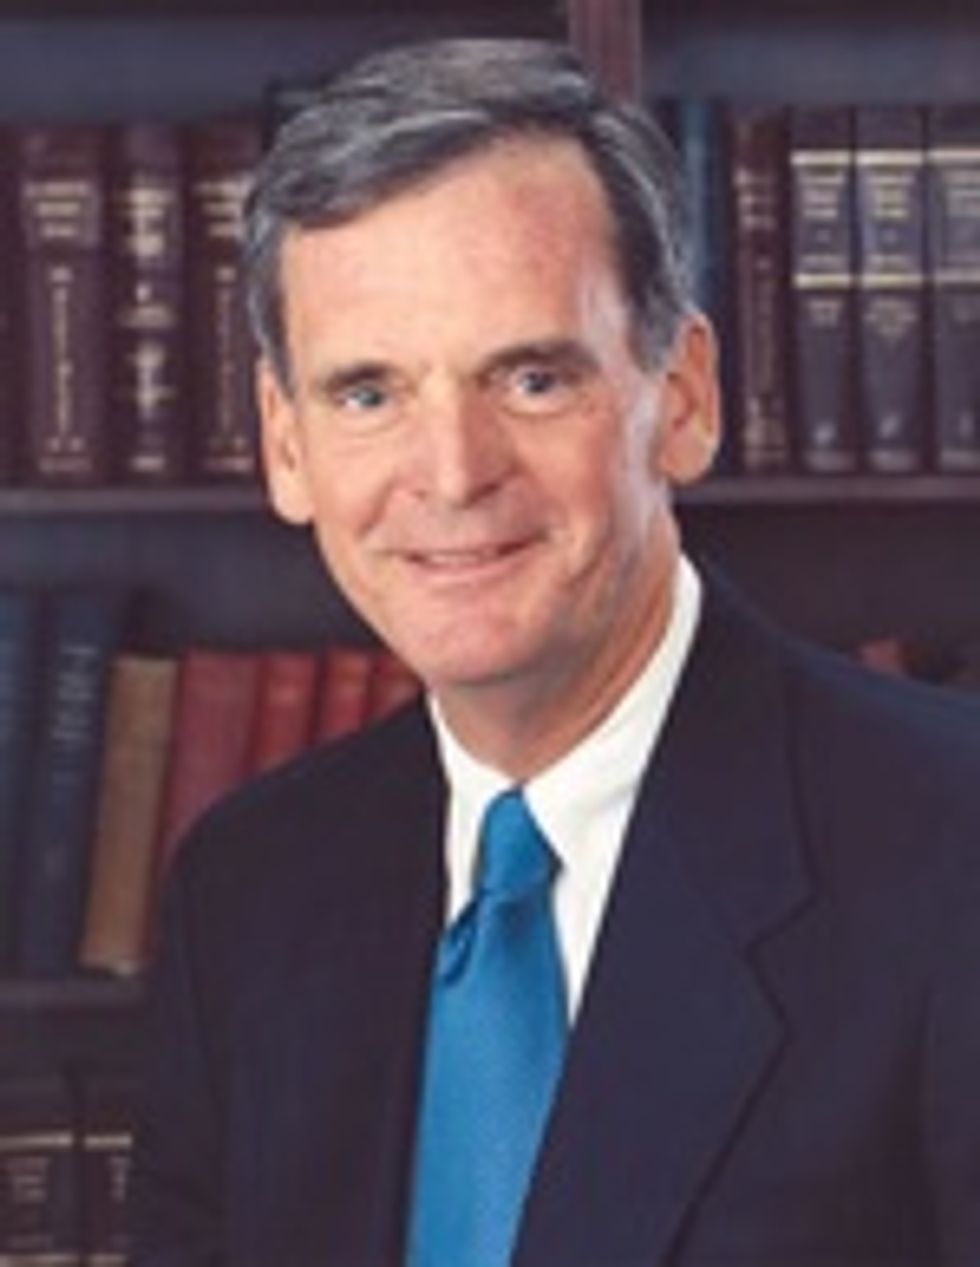 More About That Indignant Martyr, Judd Gregg